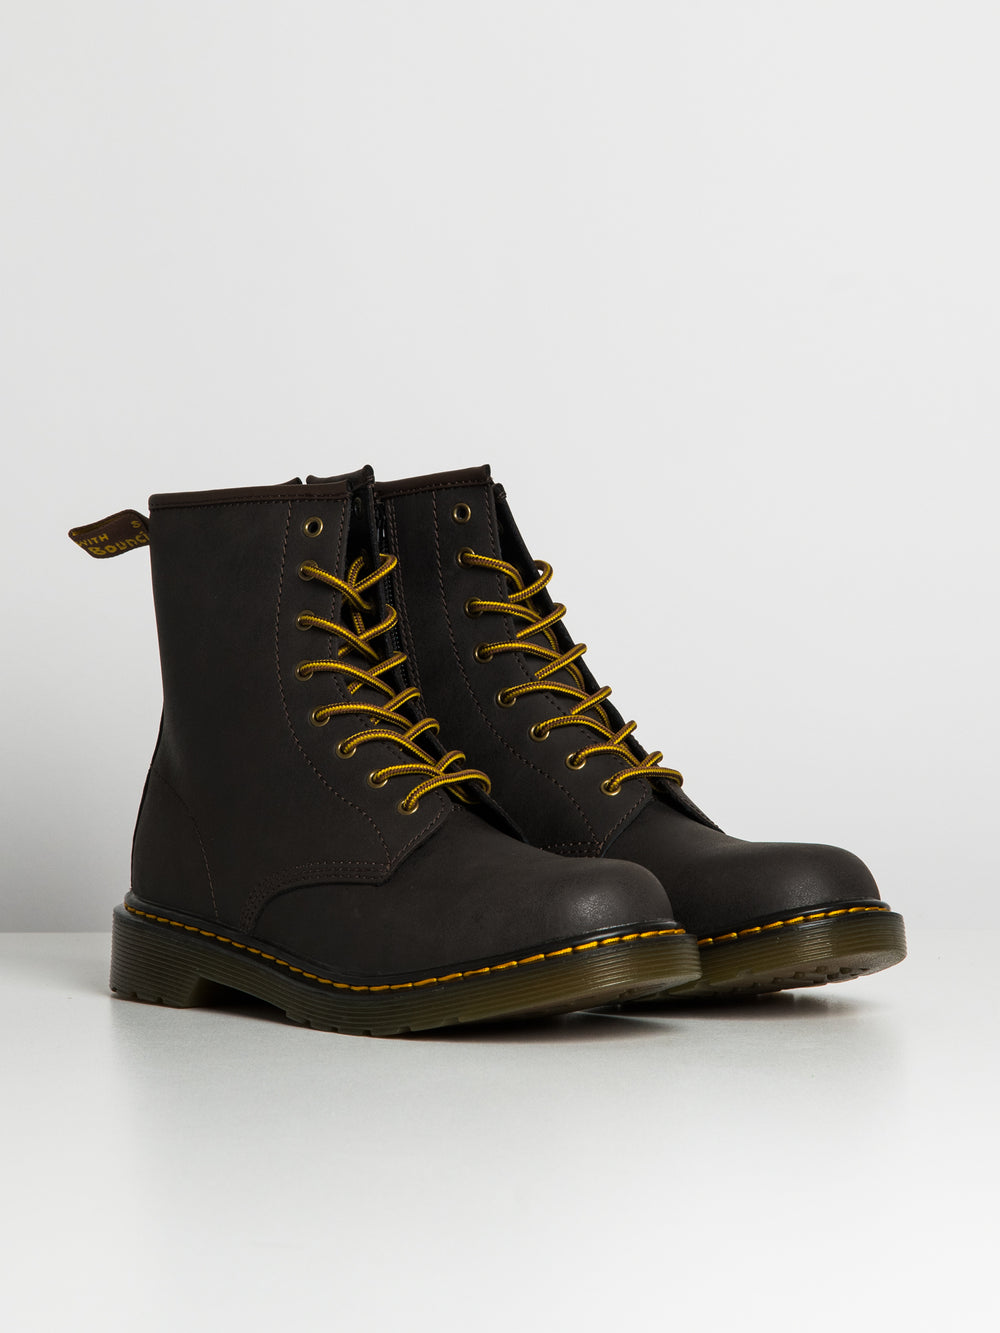 DR MARTENS KIDS 1460 YOUTH WILDHORSE LAMPER - CLEARANCE